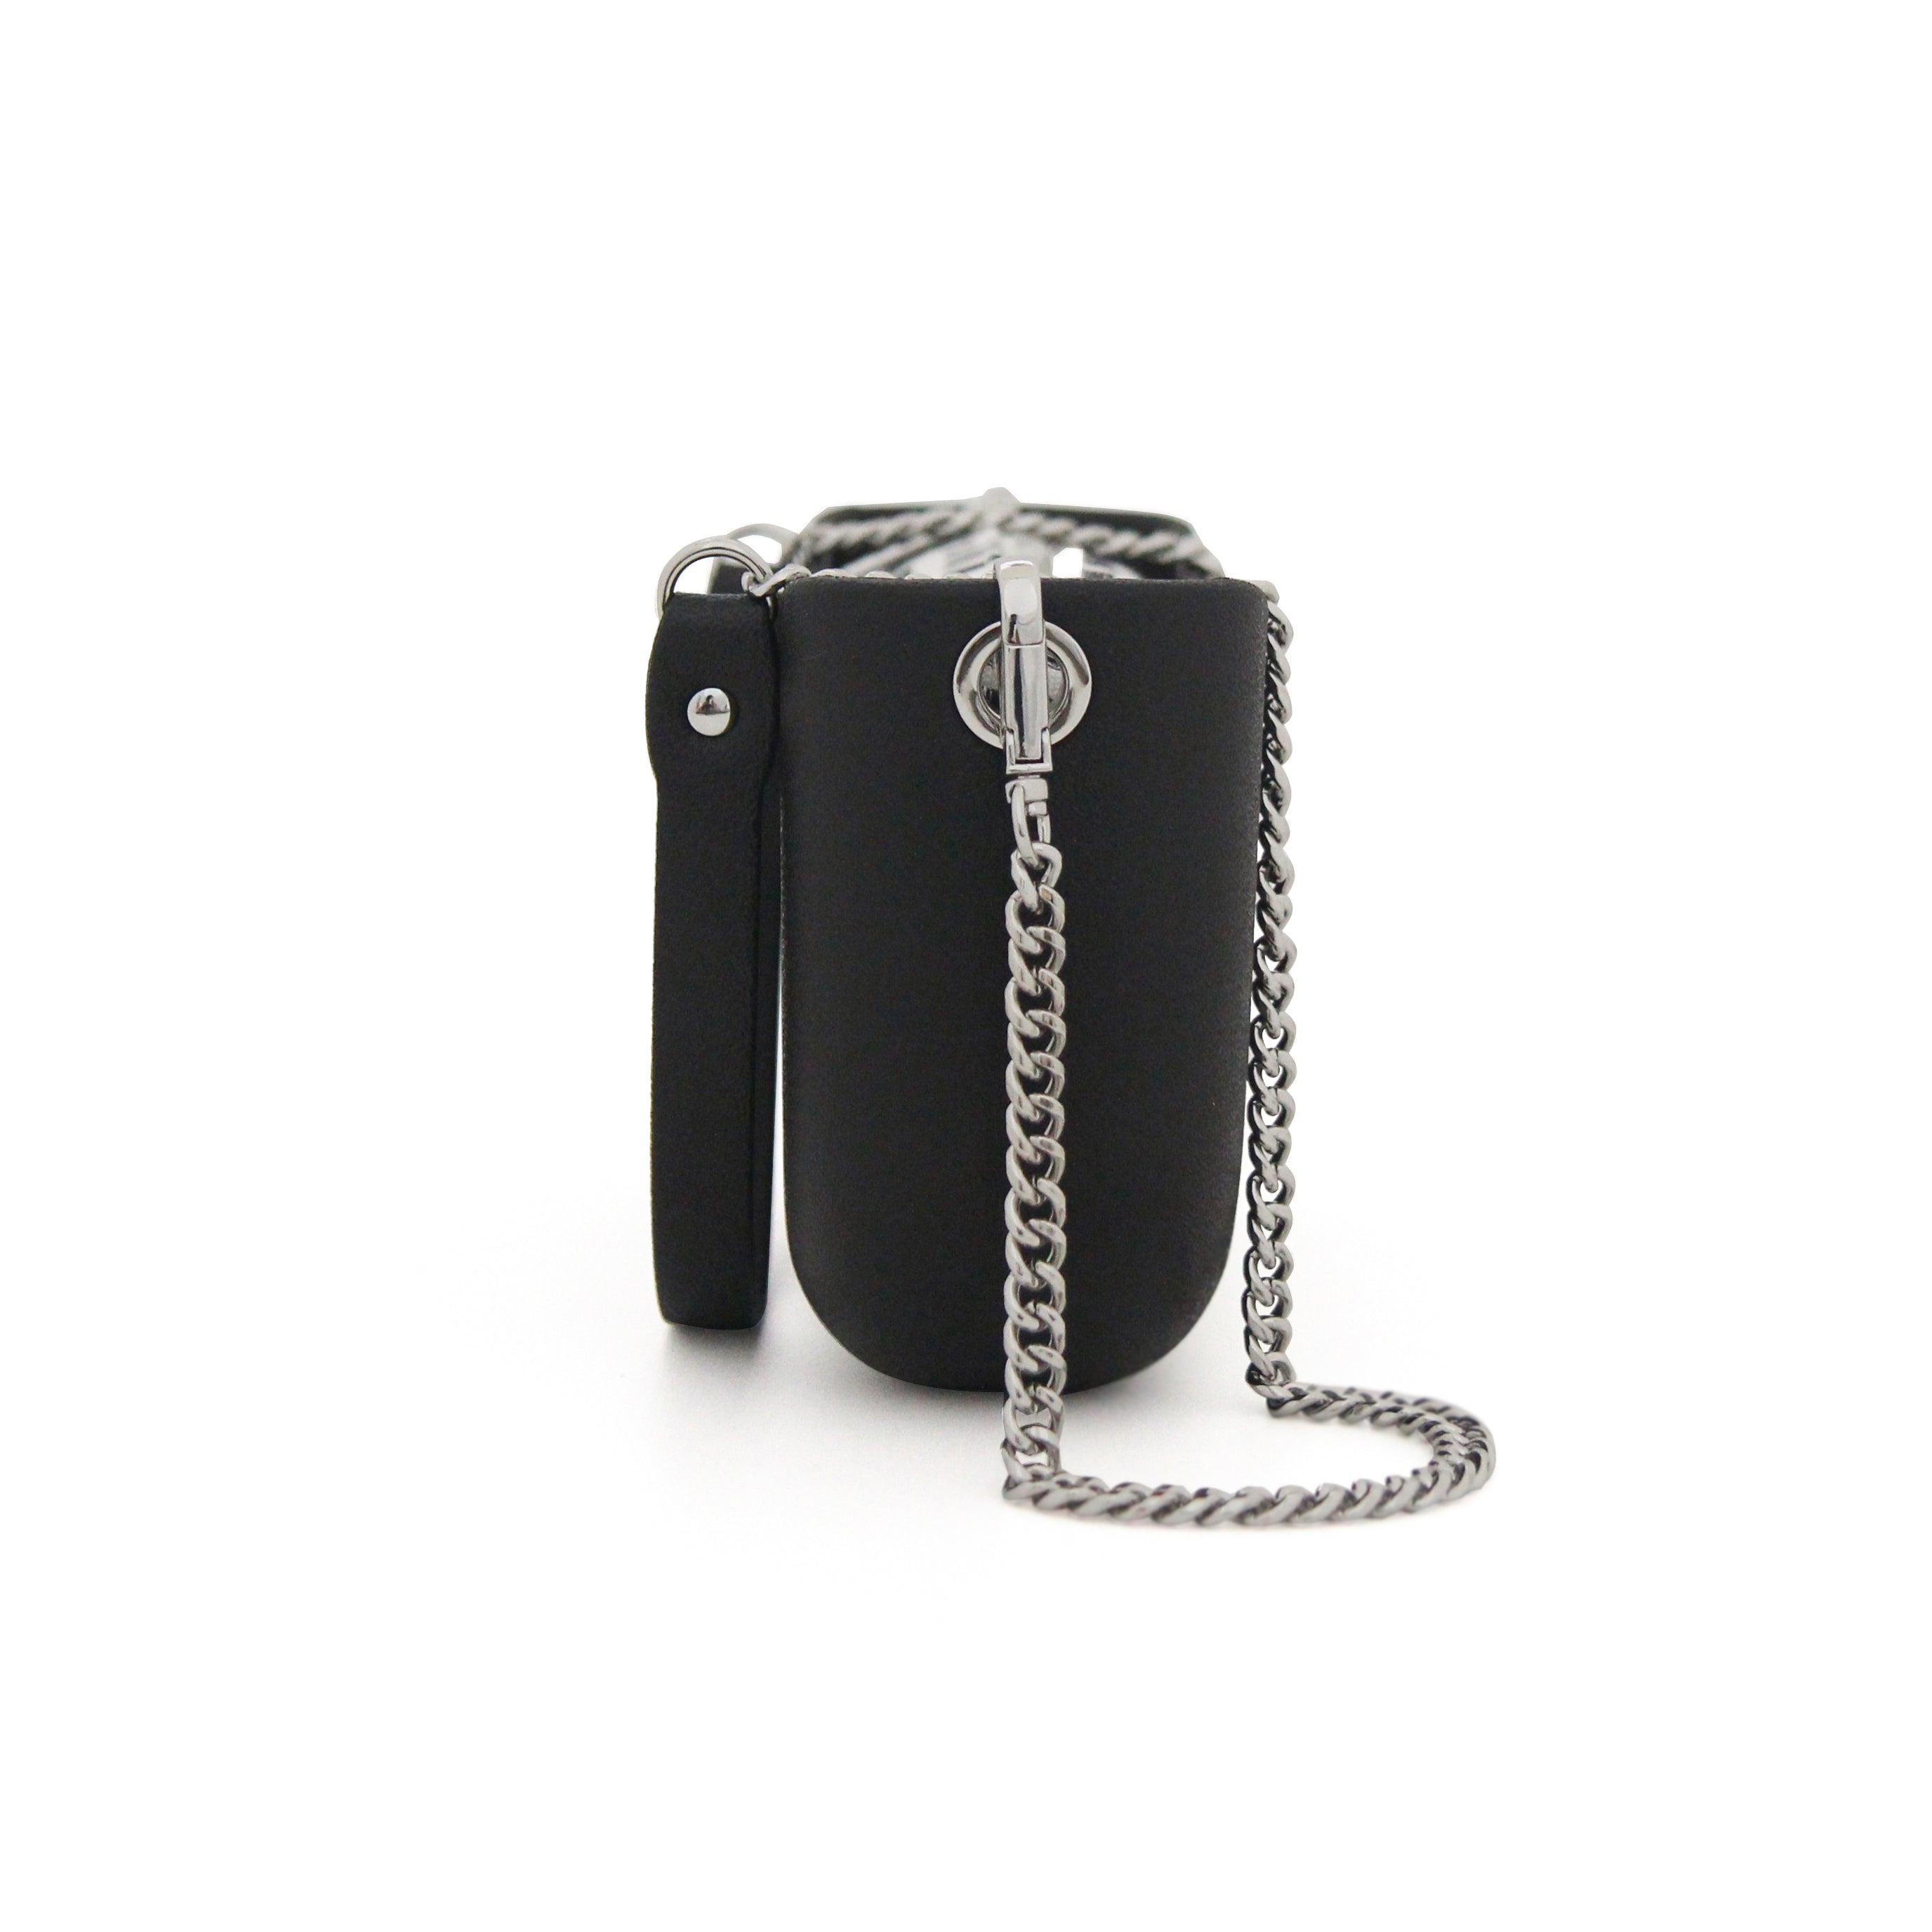 Classic BLACK with black & white canvas inner and black & silver chain strap